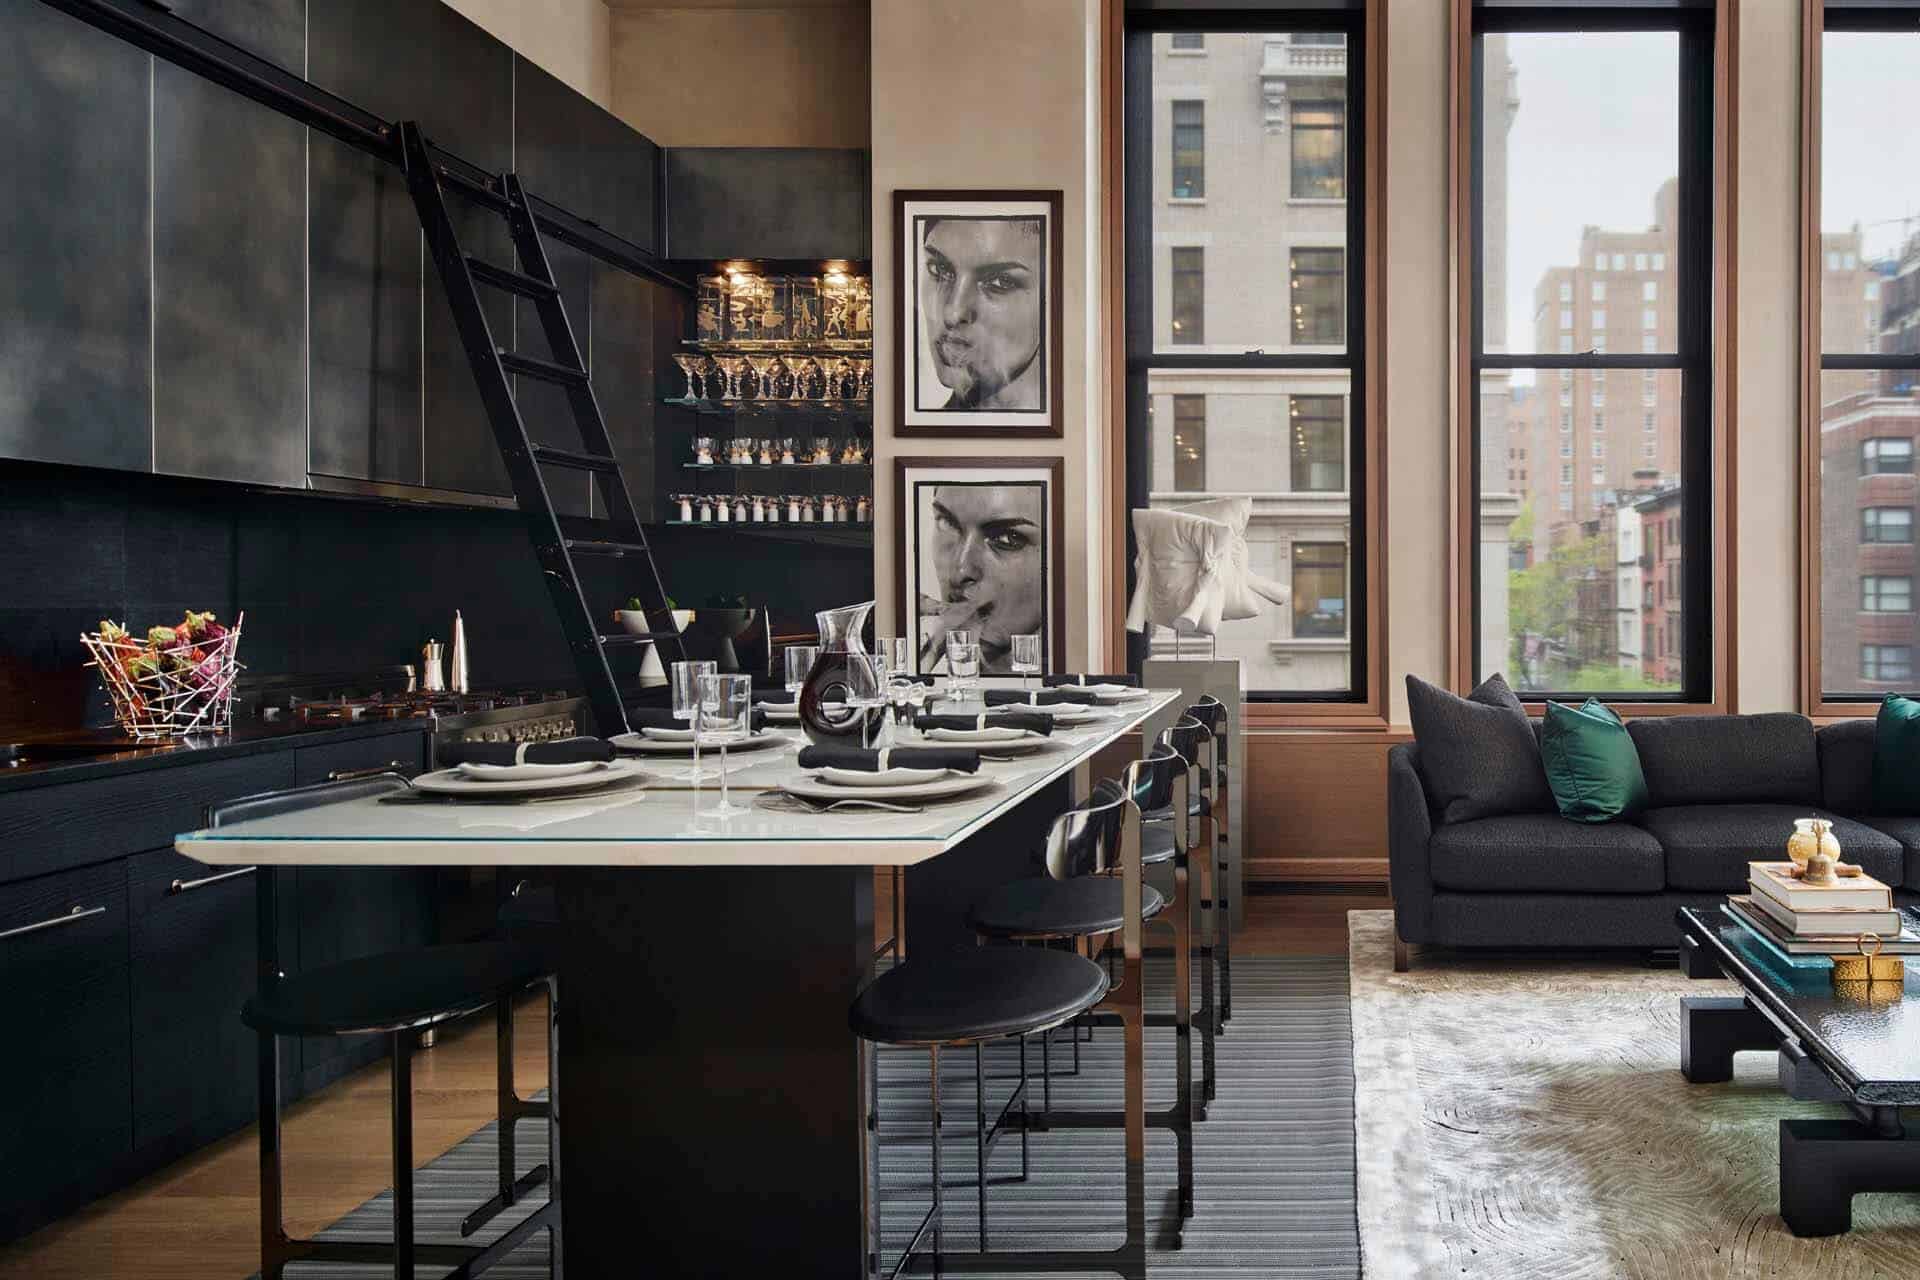 Contemporary NYC kitchen features dark ceiling level cabinets, glass shelving with a mirror backing and large island.